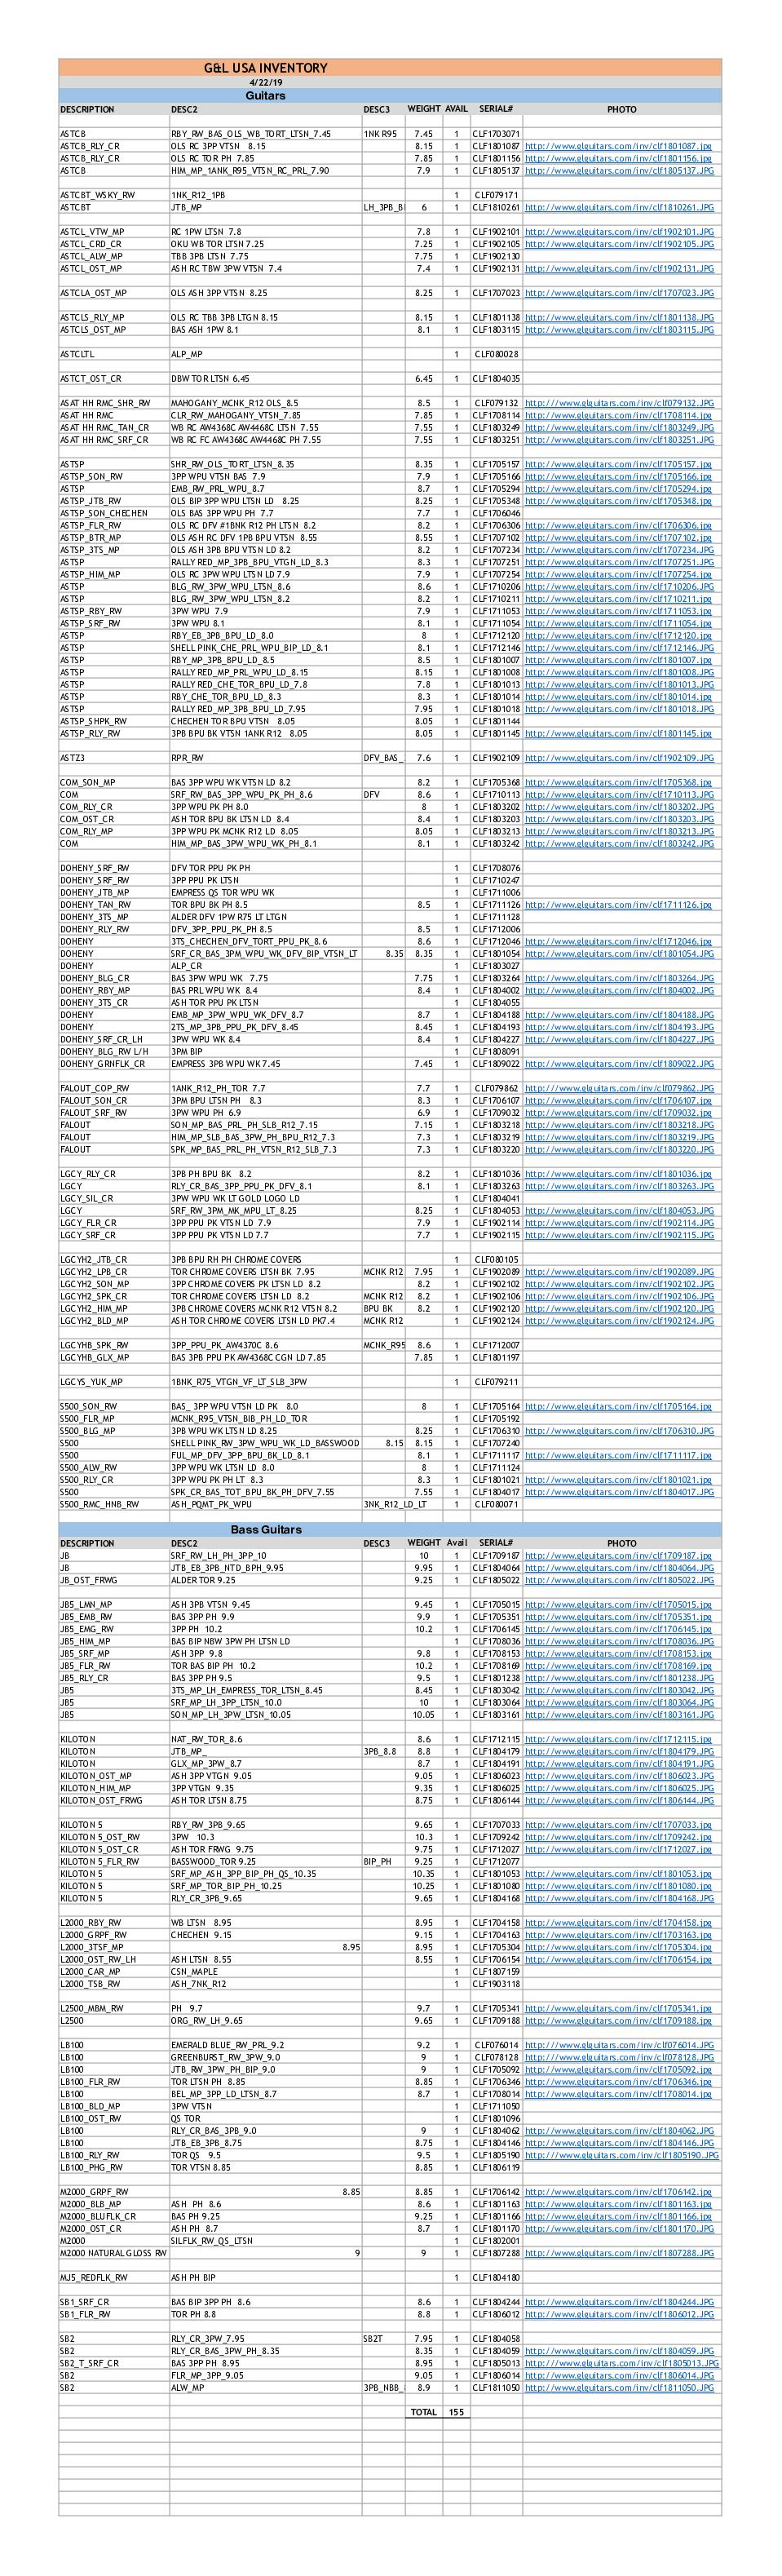 G&L Inventory-04/22/2019 (PDF) - with Option Codes